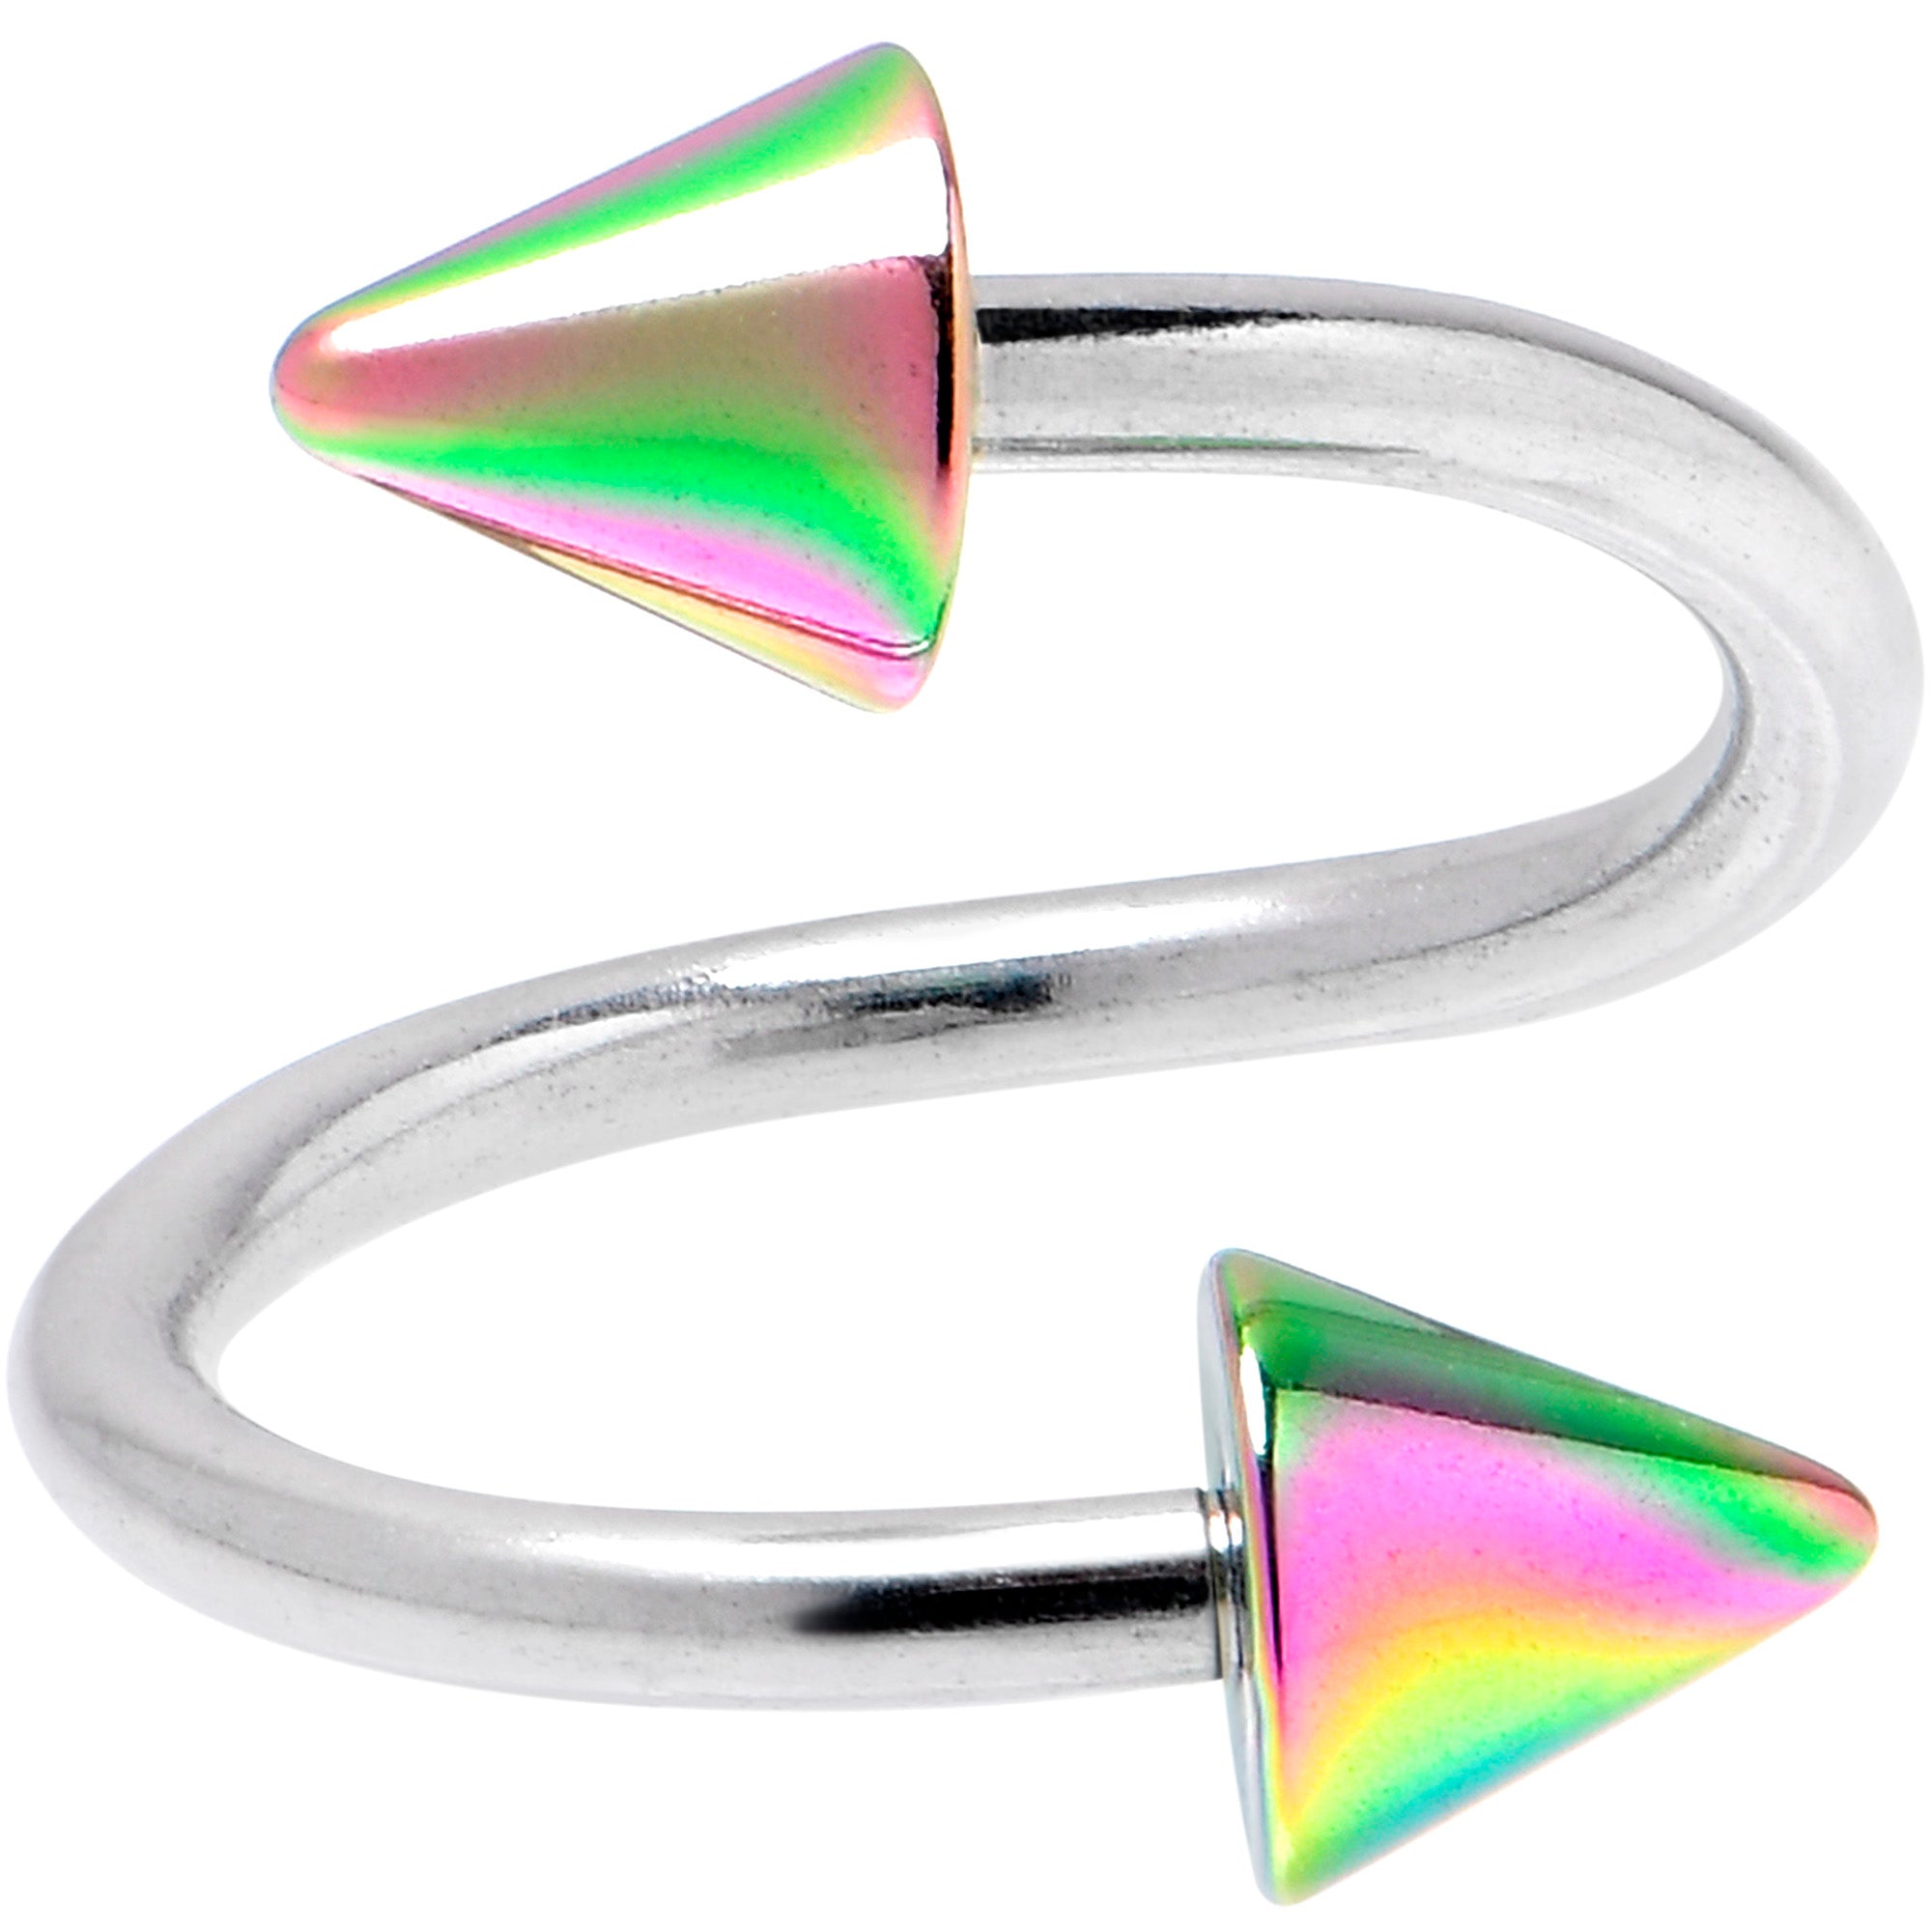 16 Gauge 3/8 Rainbow Cone Ends Spiral Twister Eyebrow Ring